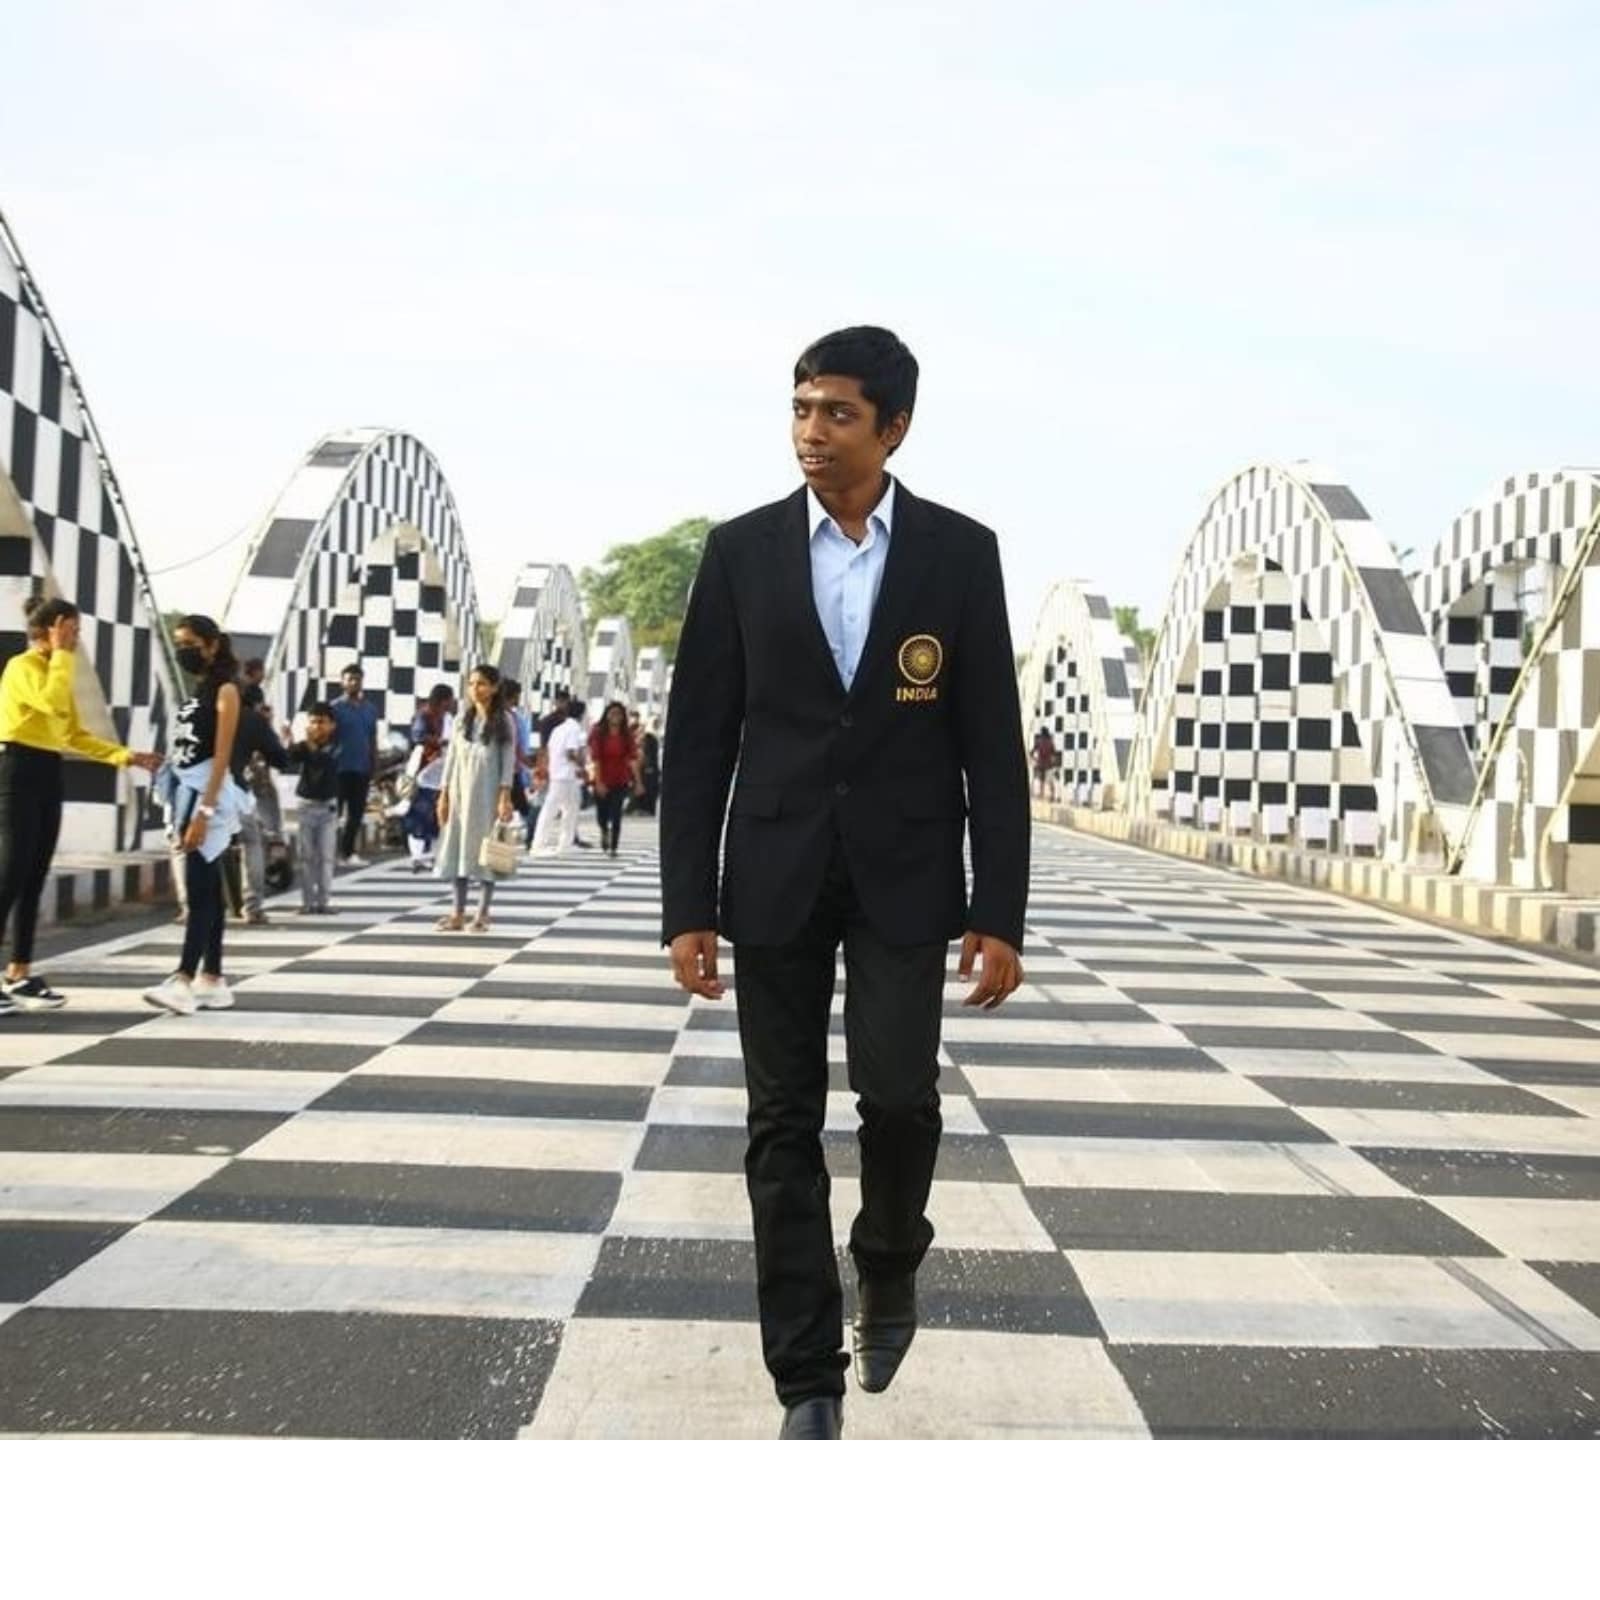 Prodigy Praggnanandhaa thrills audience including Vishy Anand at Blindfold  simultaneous chess display